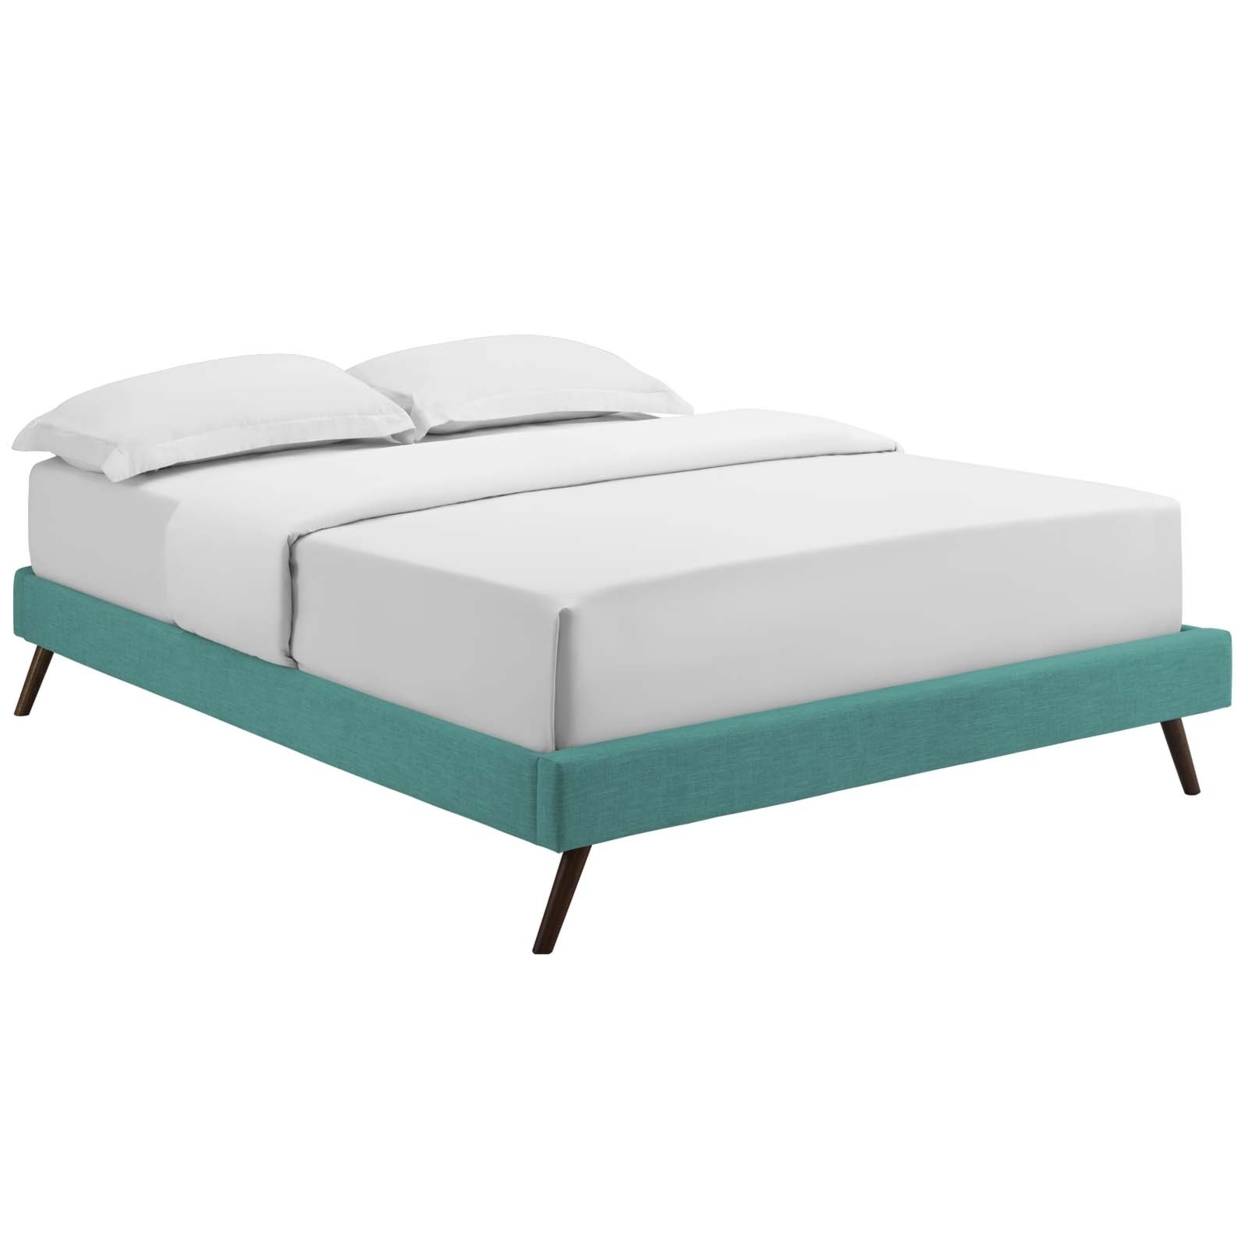 Loryn King Fabric Bed Frame With Round Splayed Legs, Teal